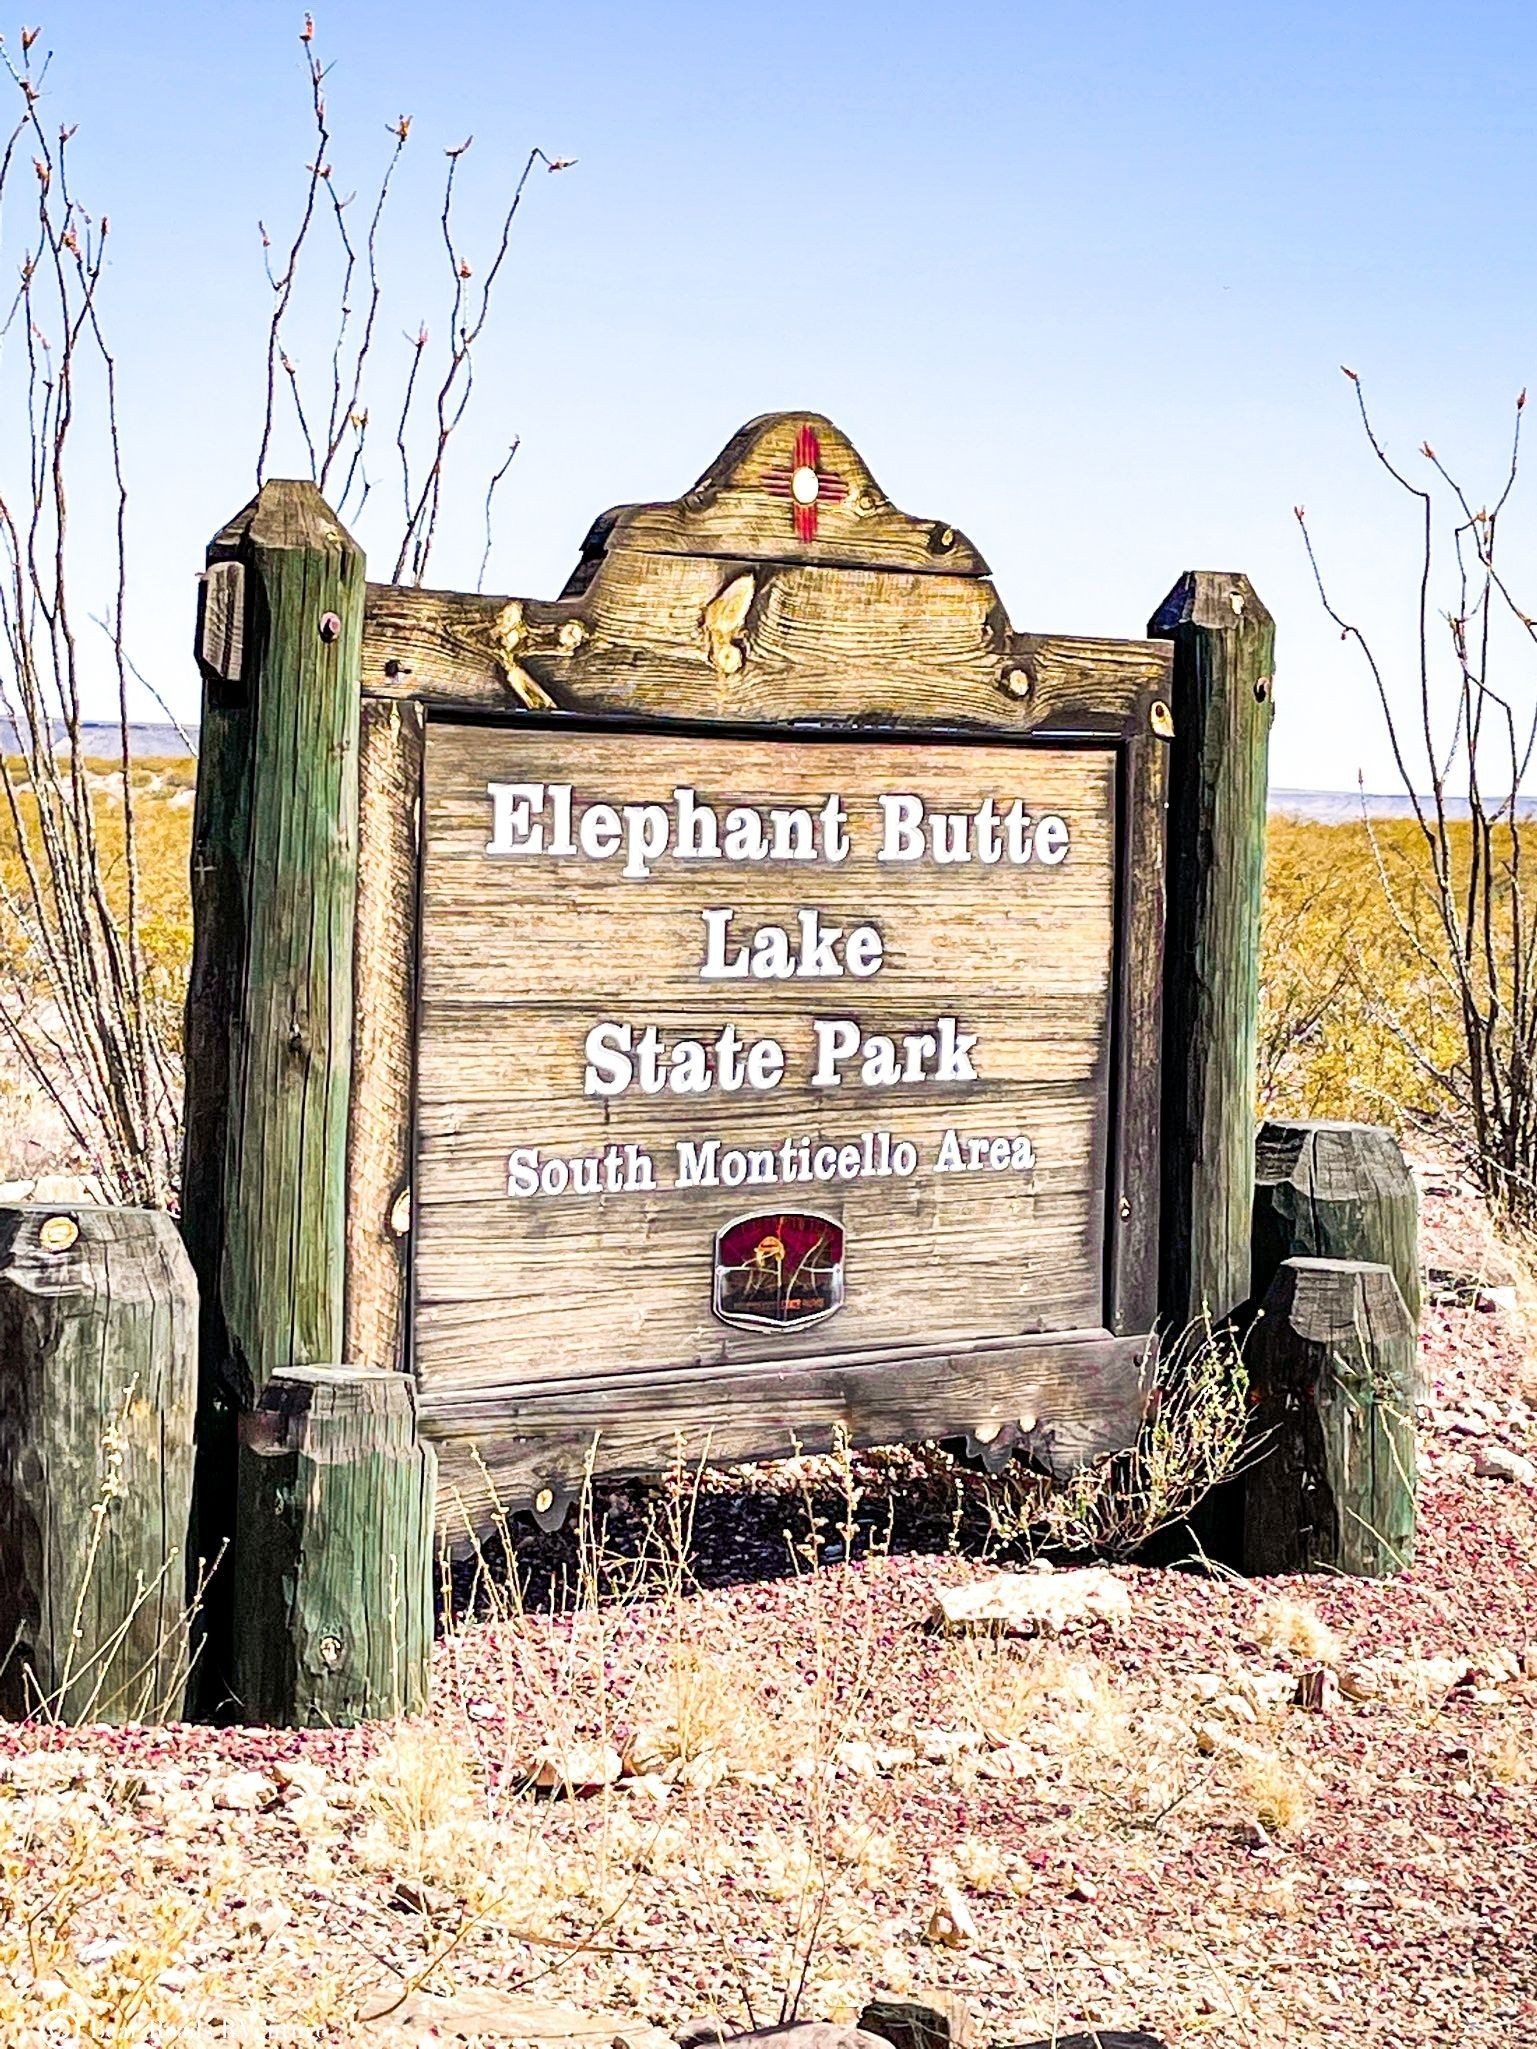 Elephant Butte State Park - South Monticello Area